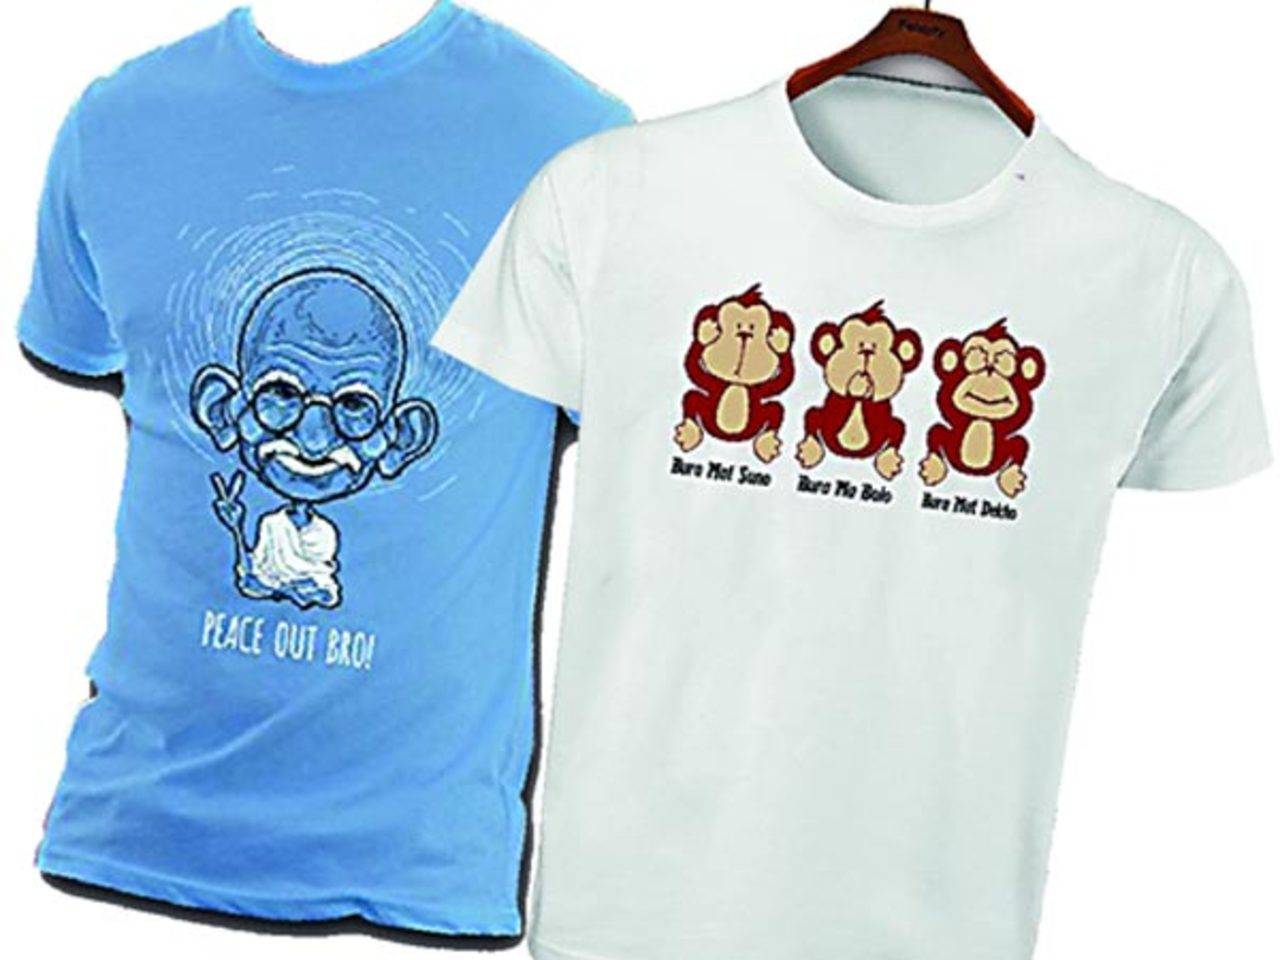 Cool T-shirts reinvent Gandhi for the younger generation | News - Times of India